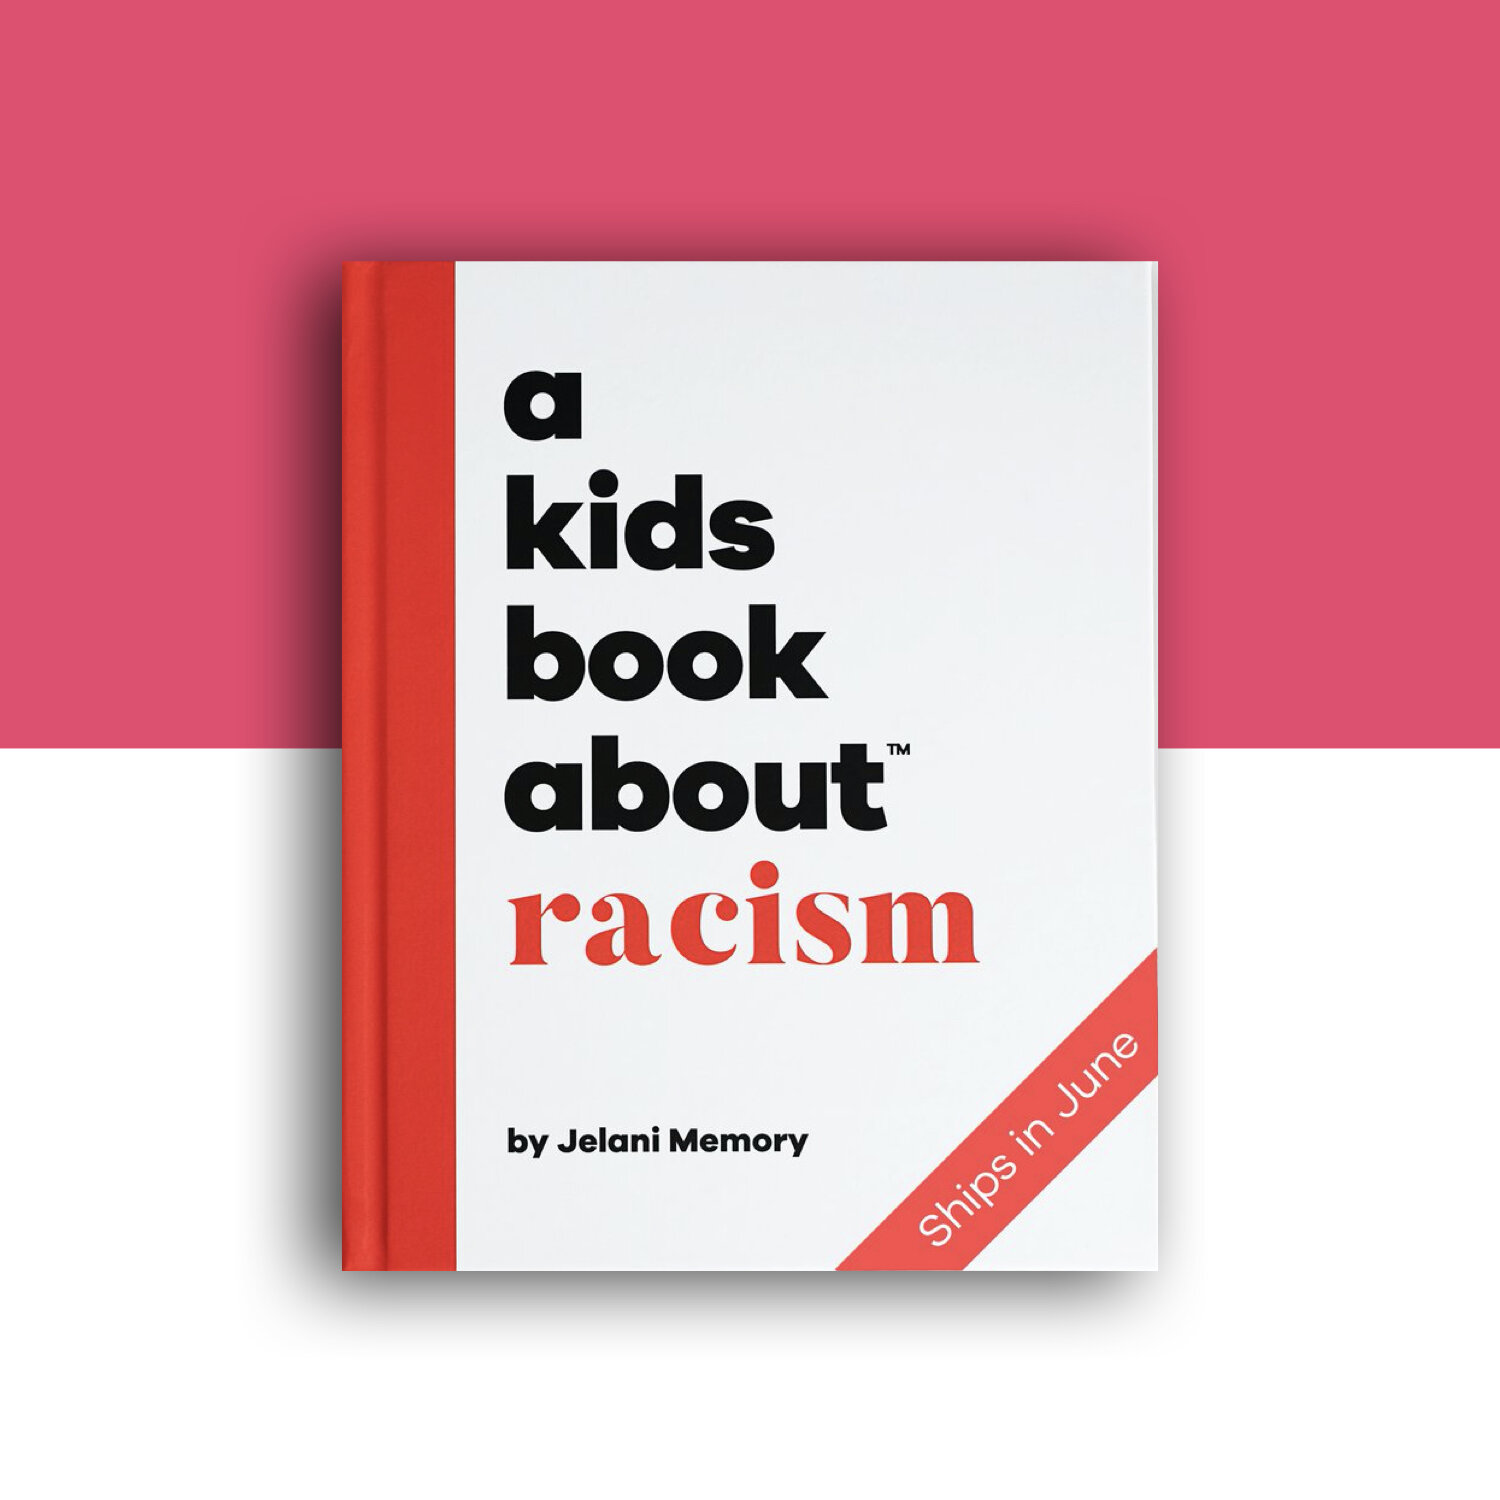 equality-superbloom-book-a-kids-book-about-racism.jpeg